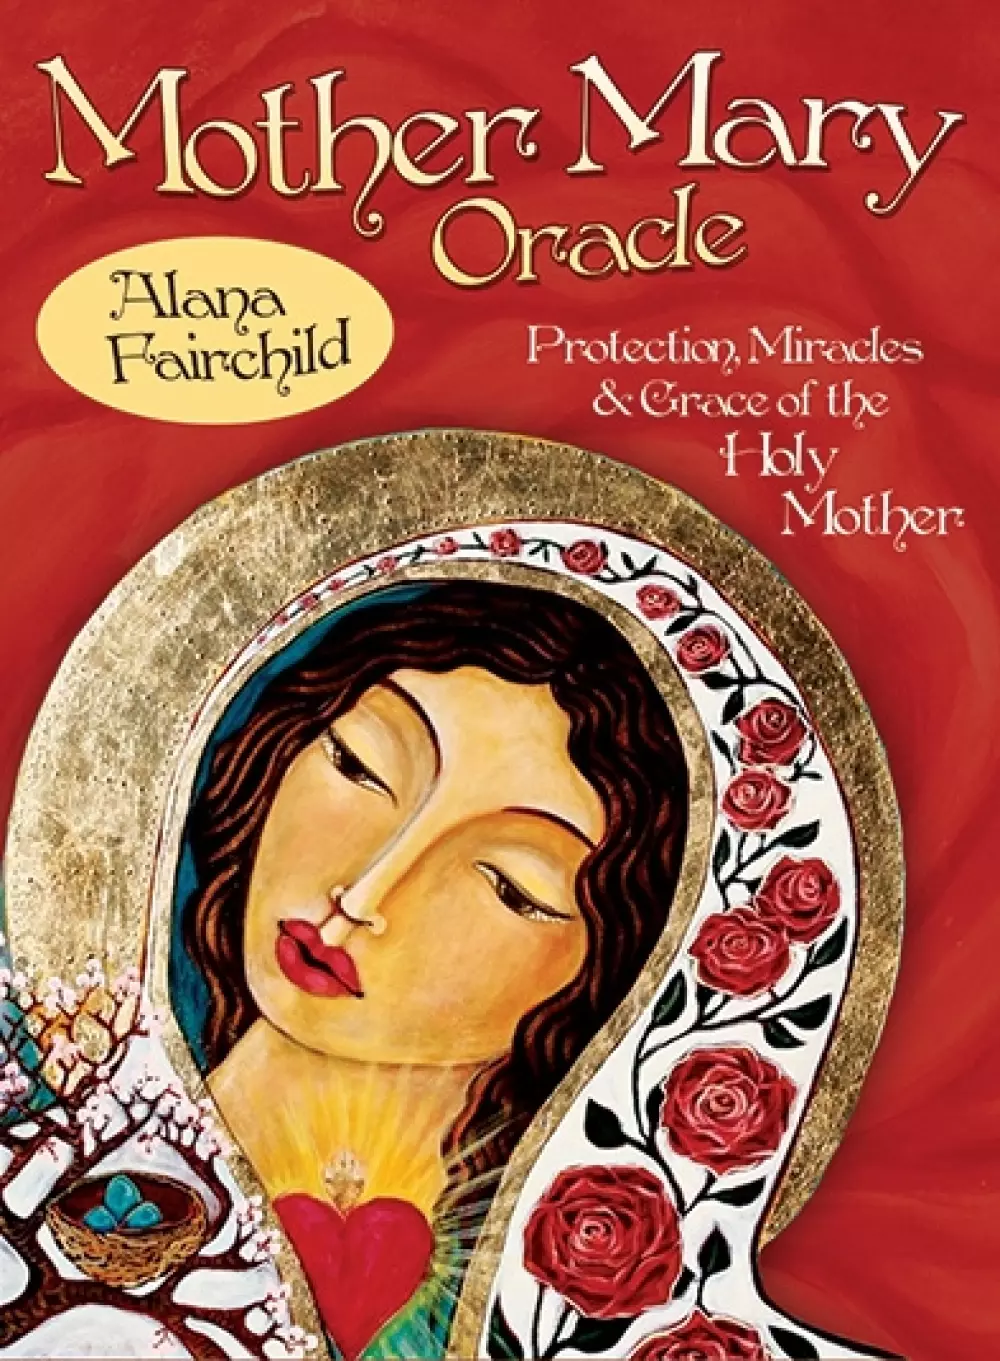 Mother mary oracle, Tarot & orakel, Orakelkort, Protection, Miracles & Grace of the Holy Mother